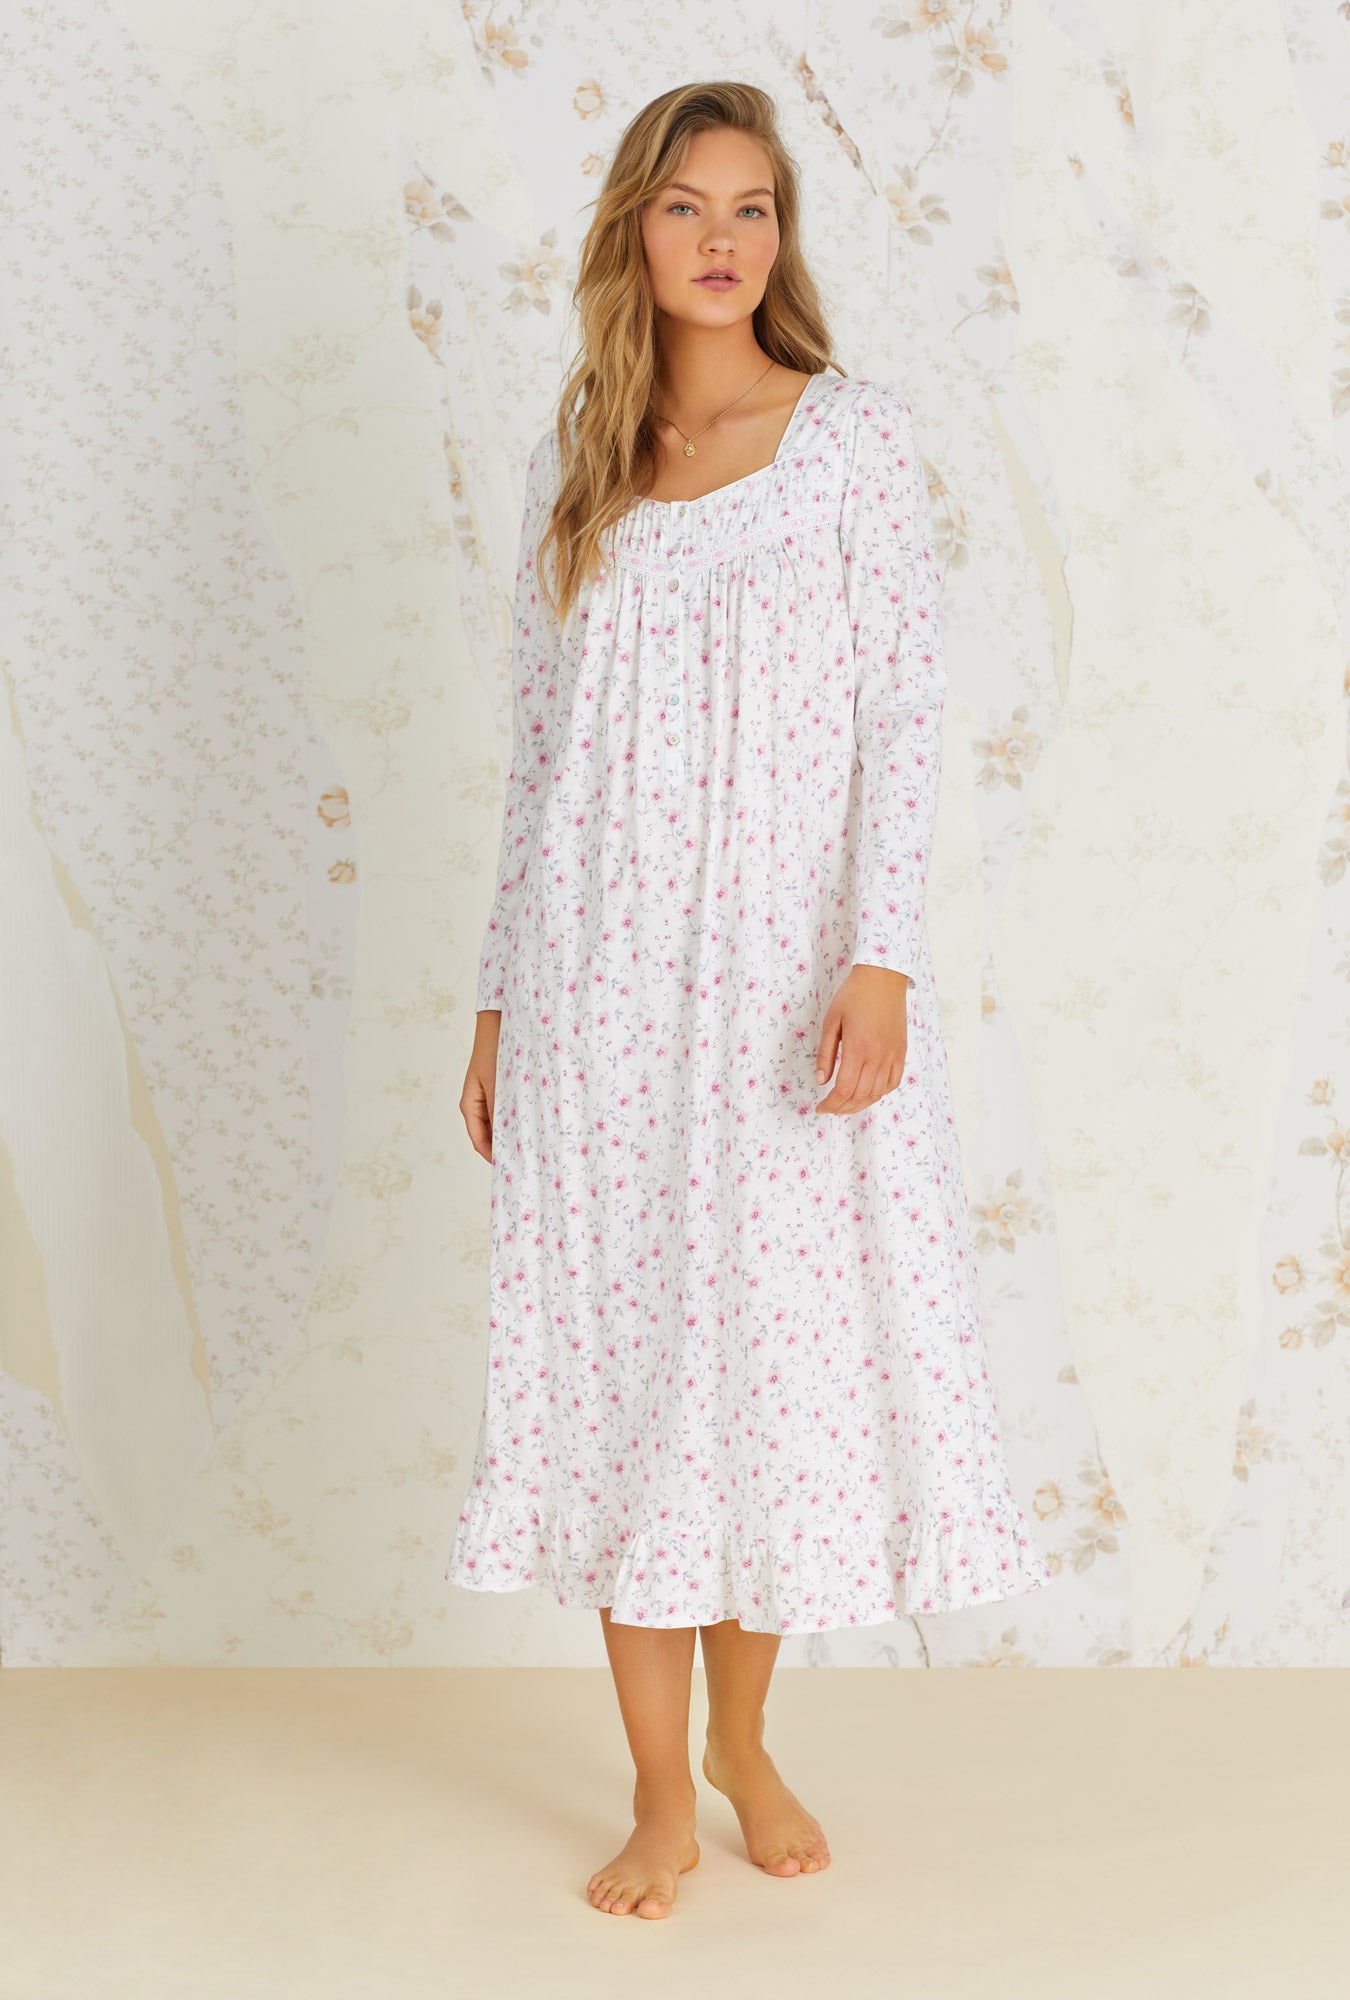 A lady wearing white long sleeve nightgown with trellis bloom print.